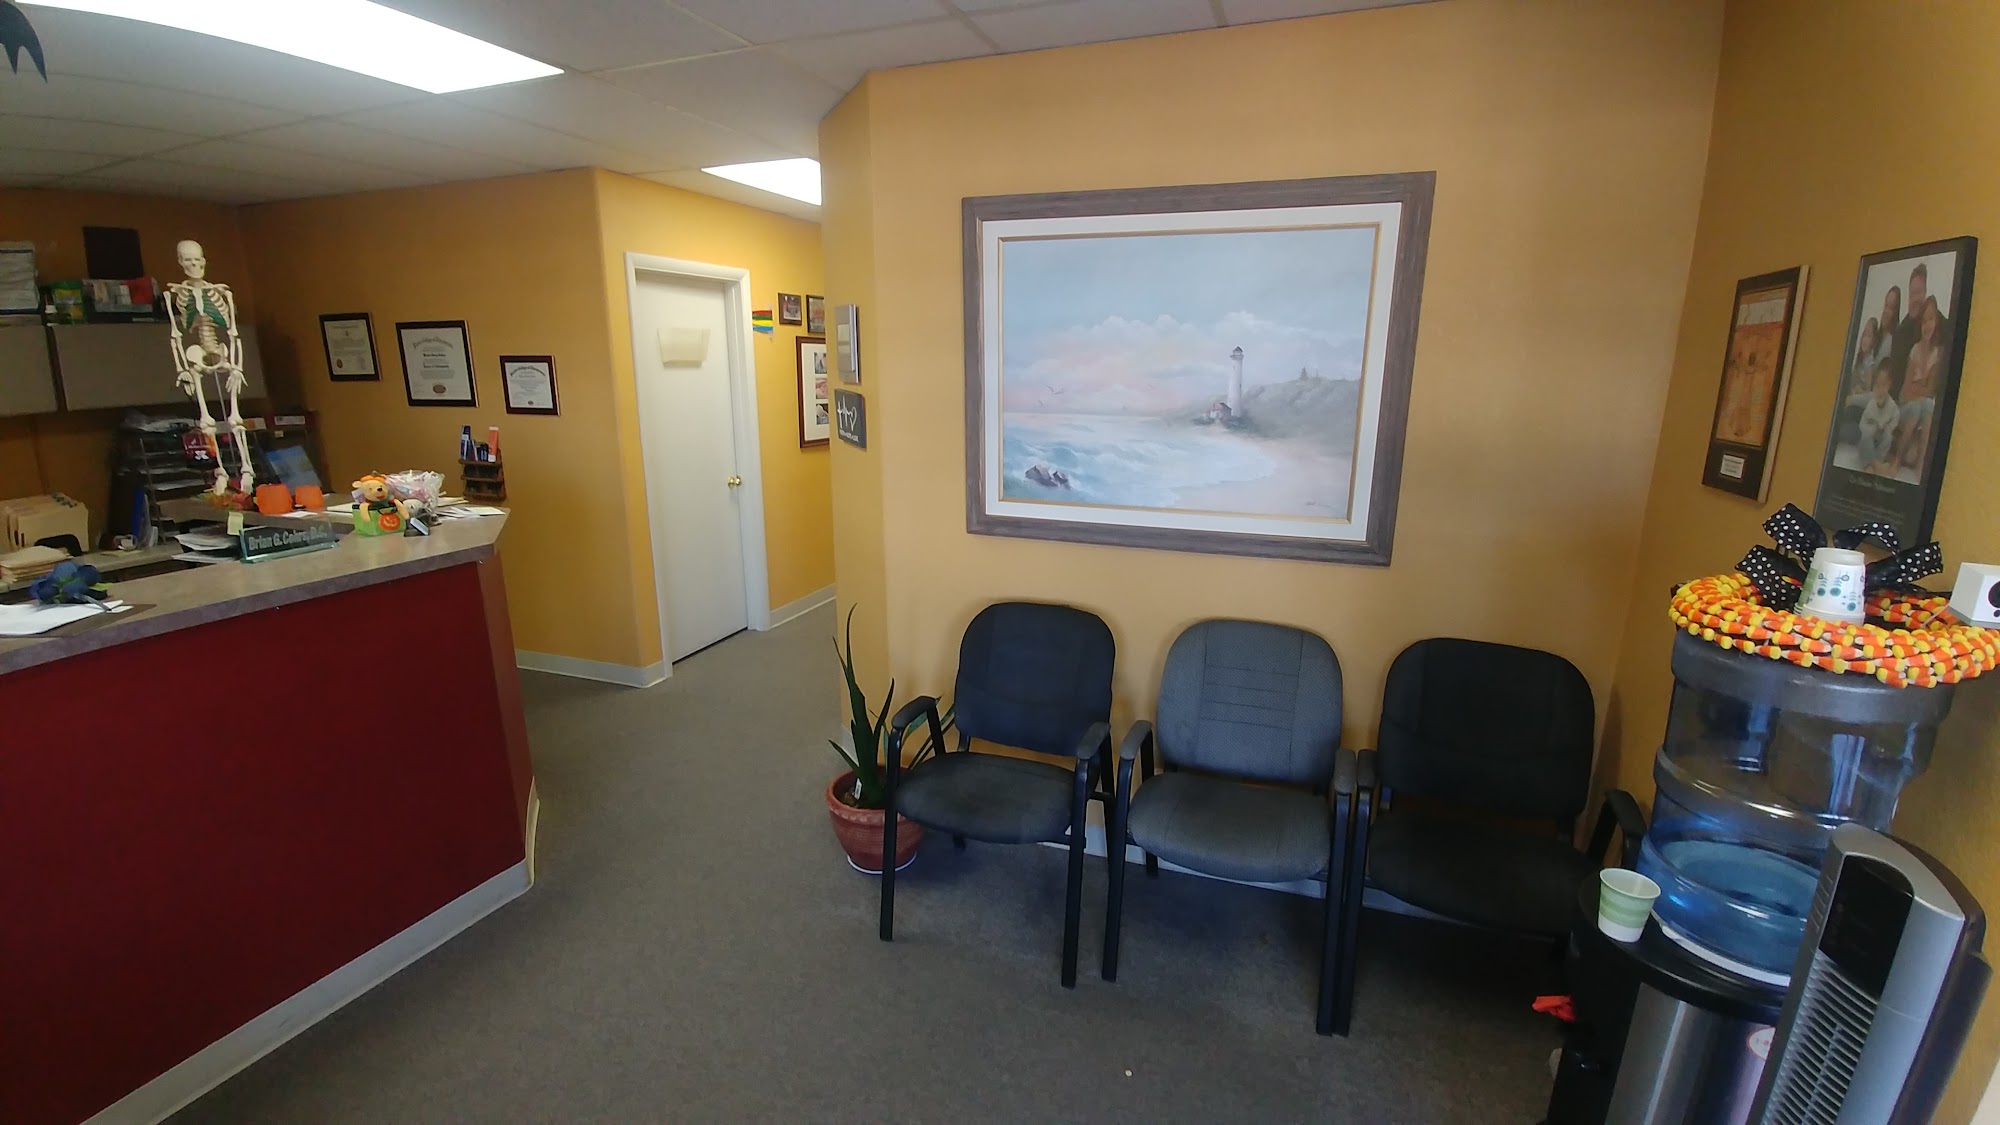 Cohrs Chiropractic Care